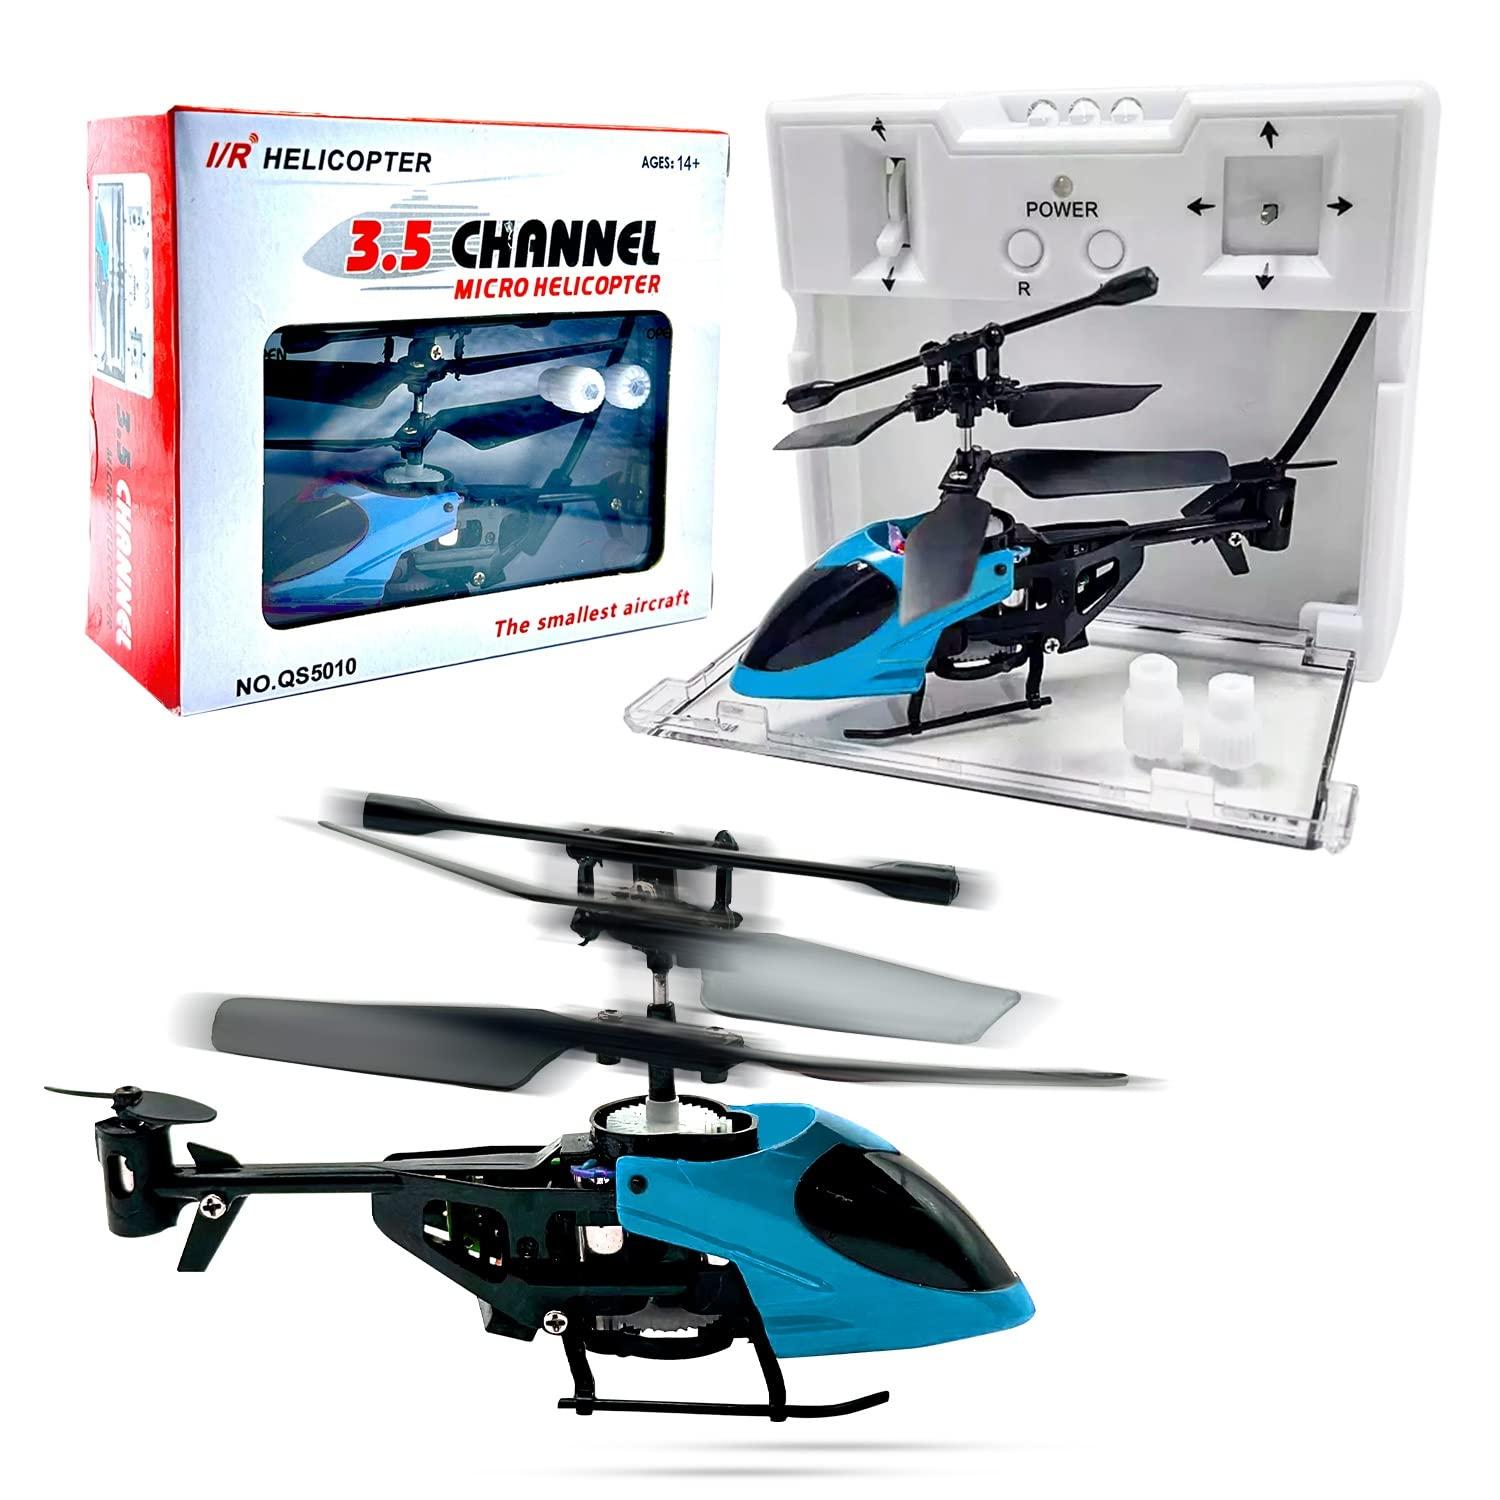 World'S Smallest Remote Control Helicopter: Impressive Flight Capabilities of World's Smallest Remote Control Helicopter